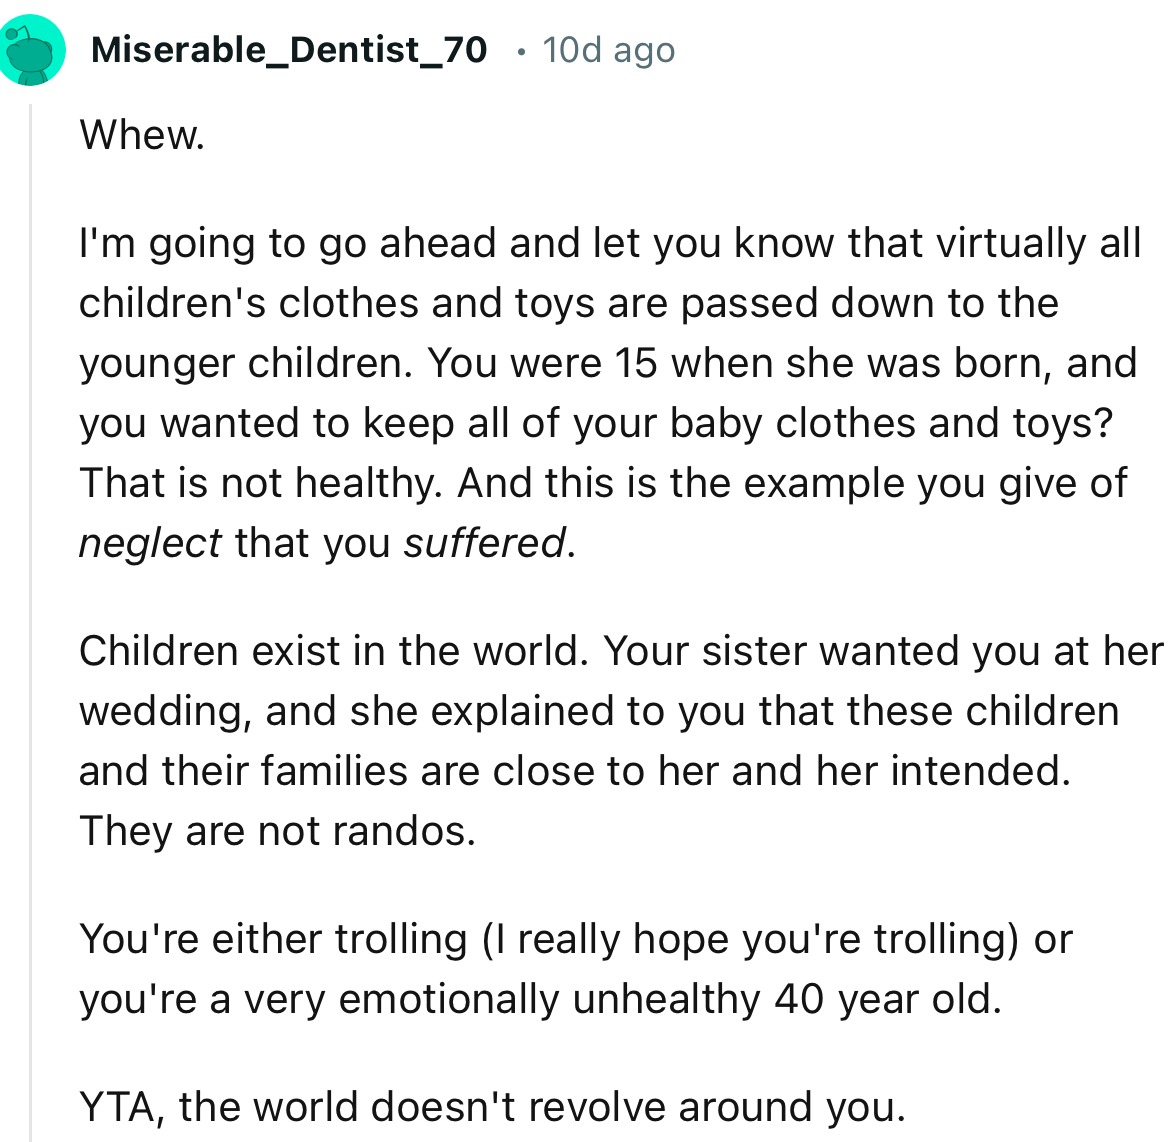 “You're either trolling (I really hope you're trolling) or you're a very emotionally unhealthy 40 year old.”